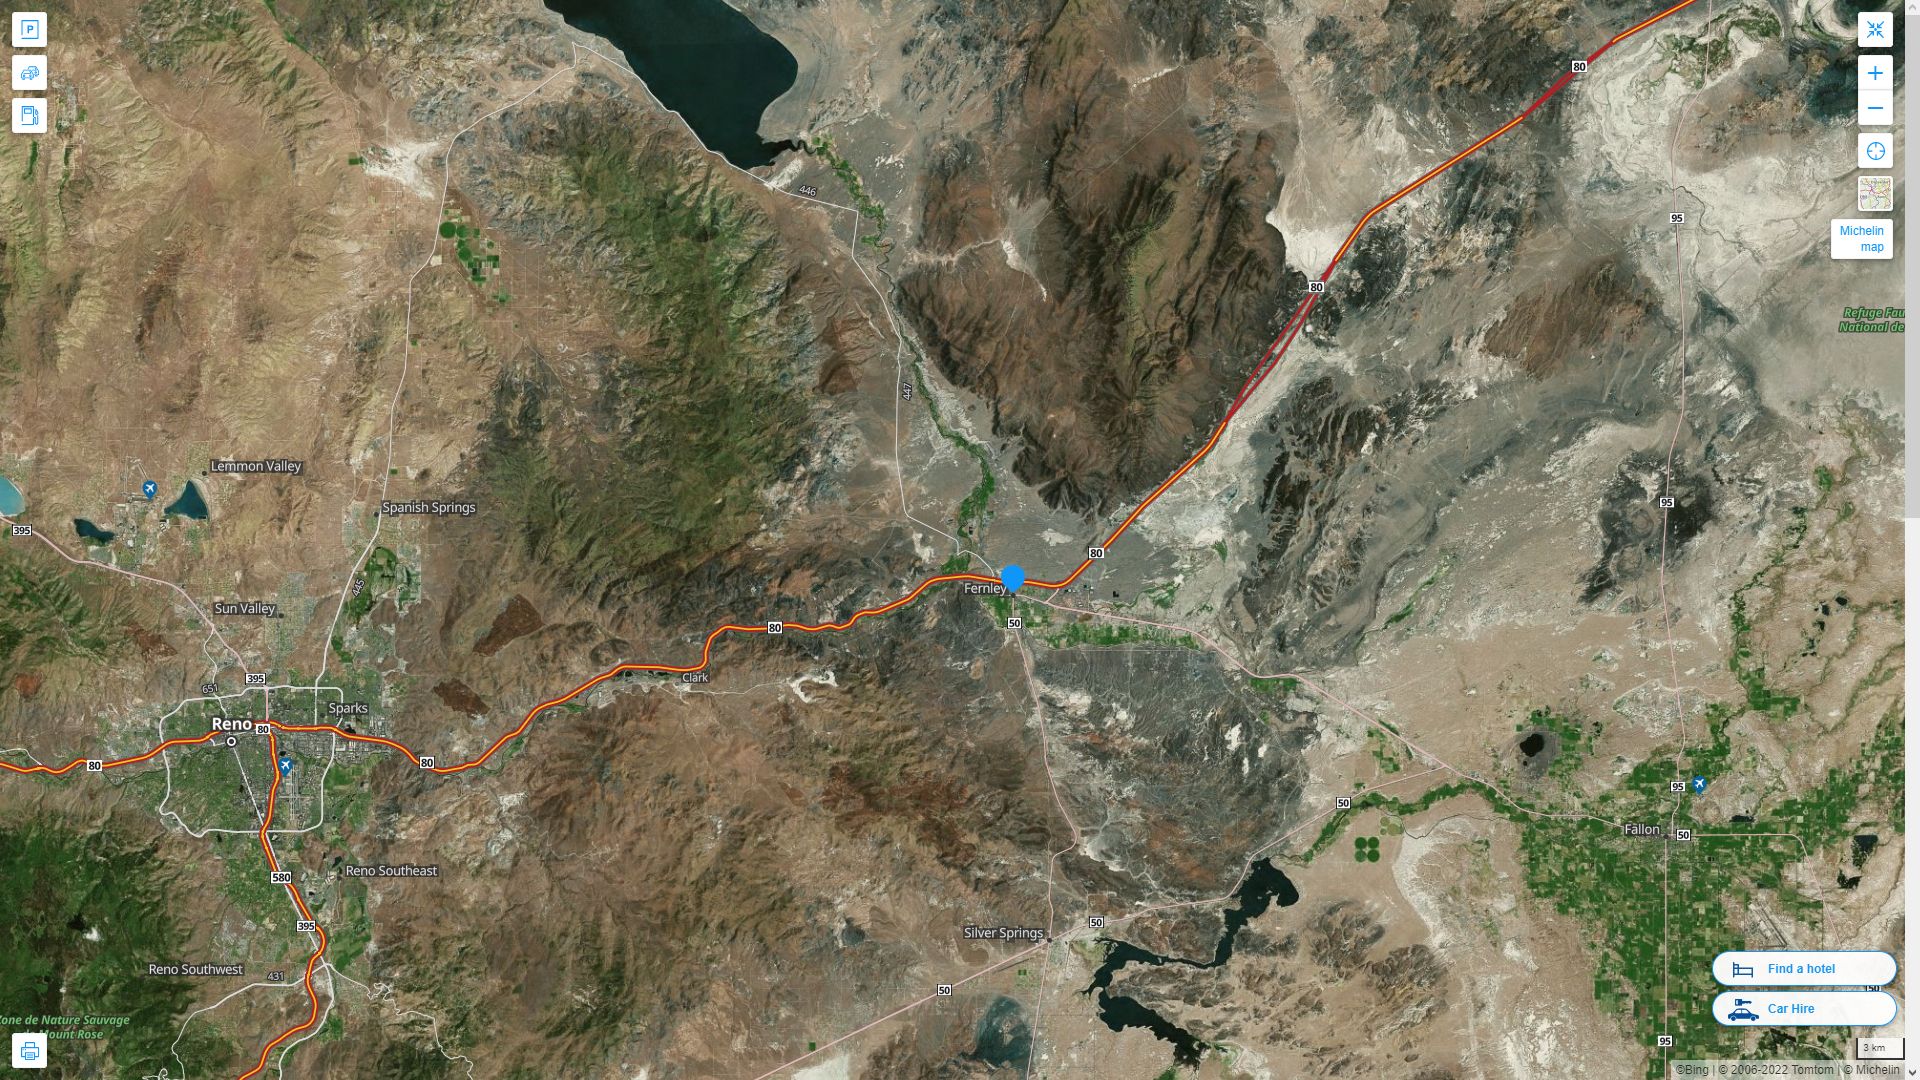 Fernley Nevada Highway and Road Map with Satellite View